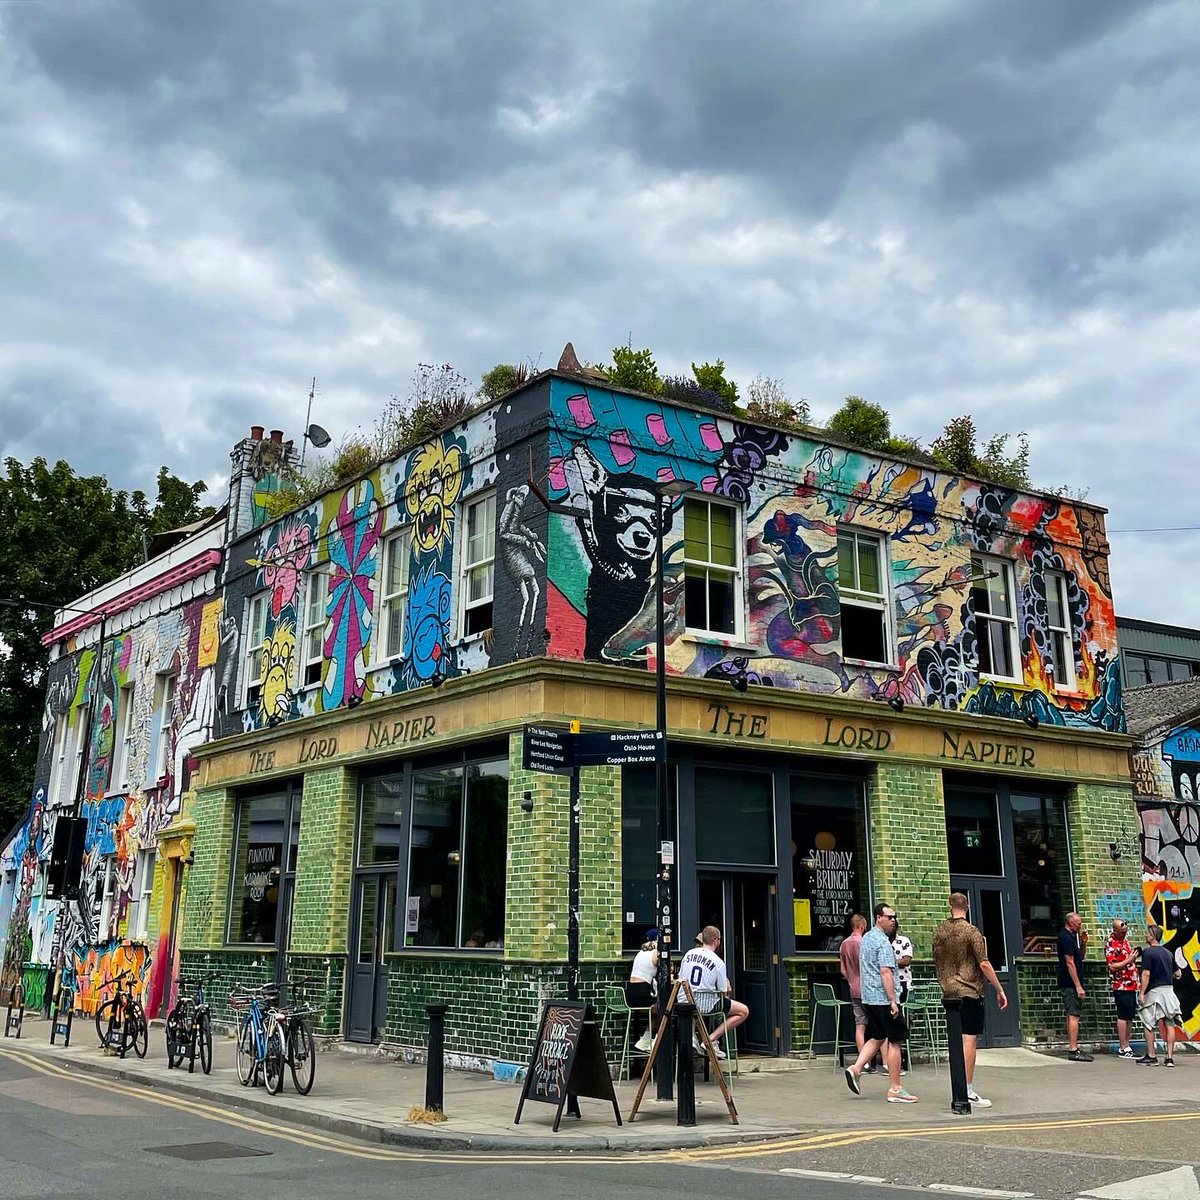 The Lord Napier Star
📍25 White Post Ln, London E9 5ER
🚇 Hackney Wick
🍺 £5.90 Paulaner 
❤️ The only pub in Hackney Wick.

This pub will predominantly appeal to a younger crowd but as a middle aged man I really enjoyed my visit here.

#pub #londonpubs #lordnapier #hackneywick